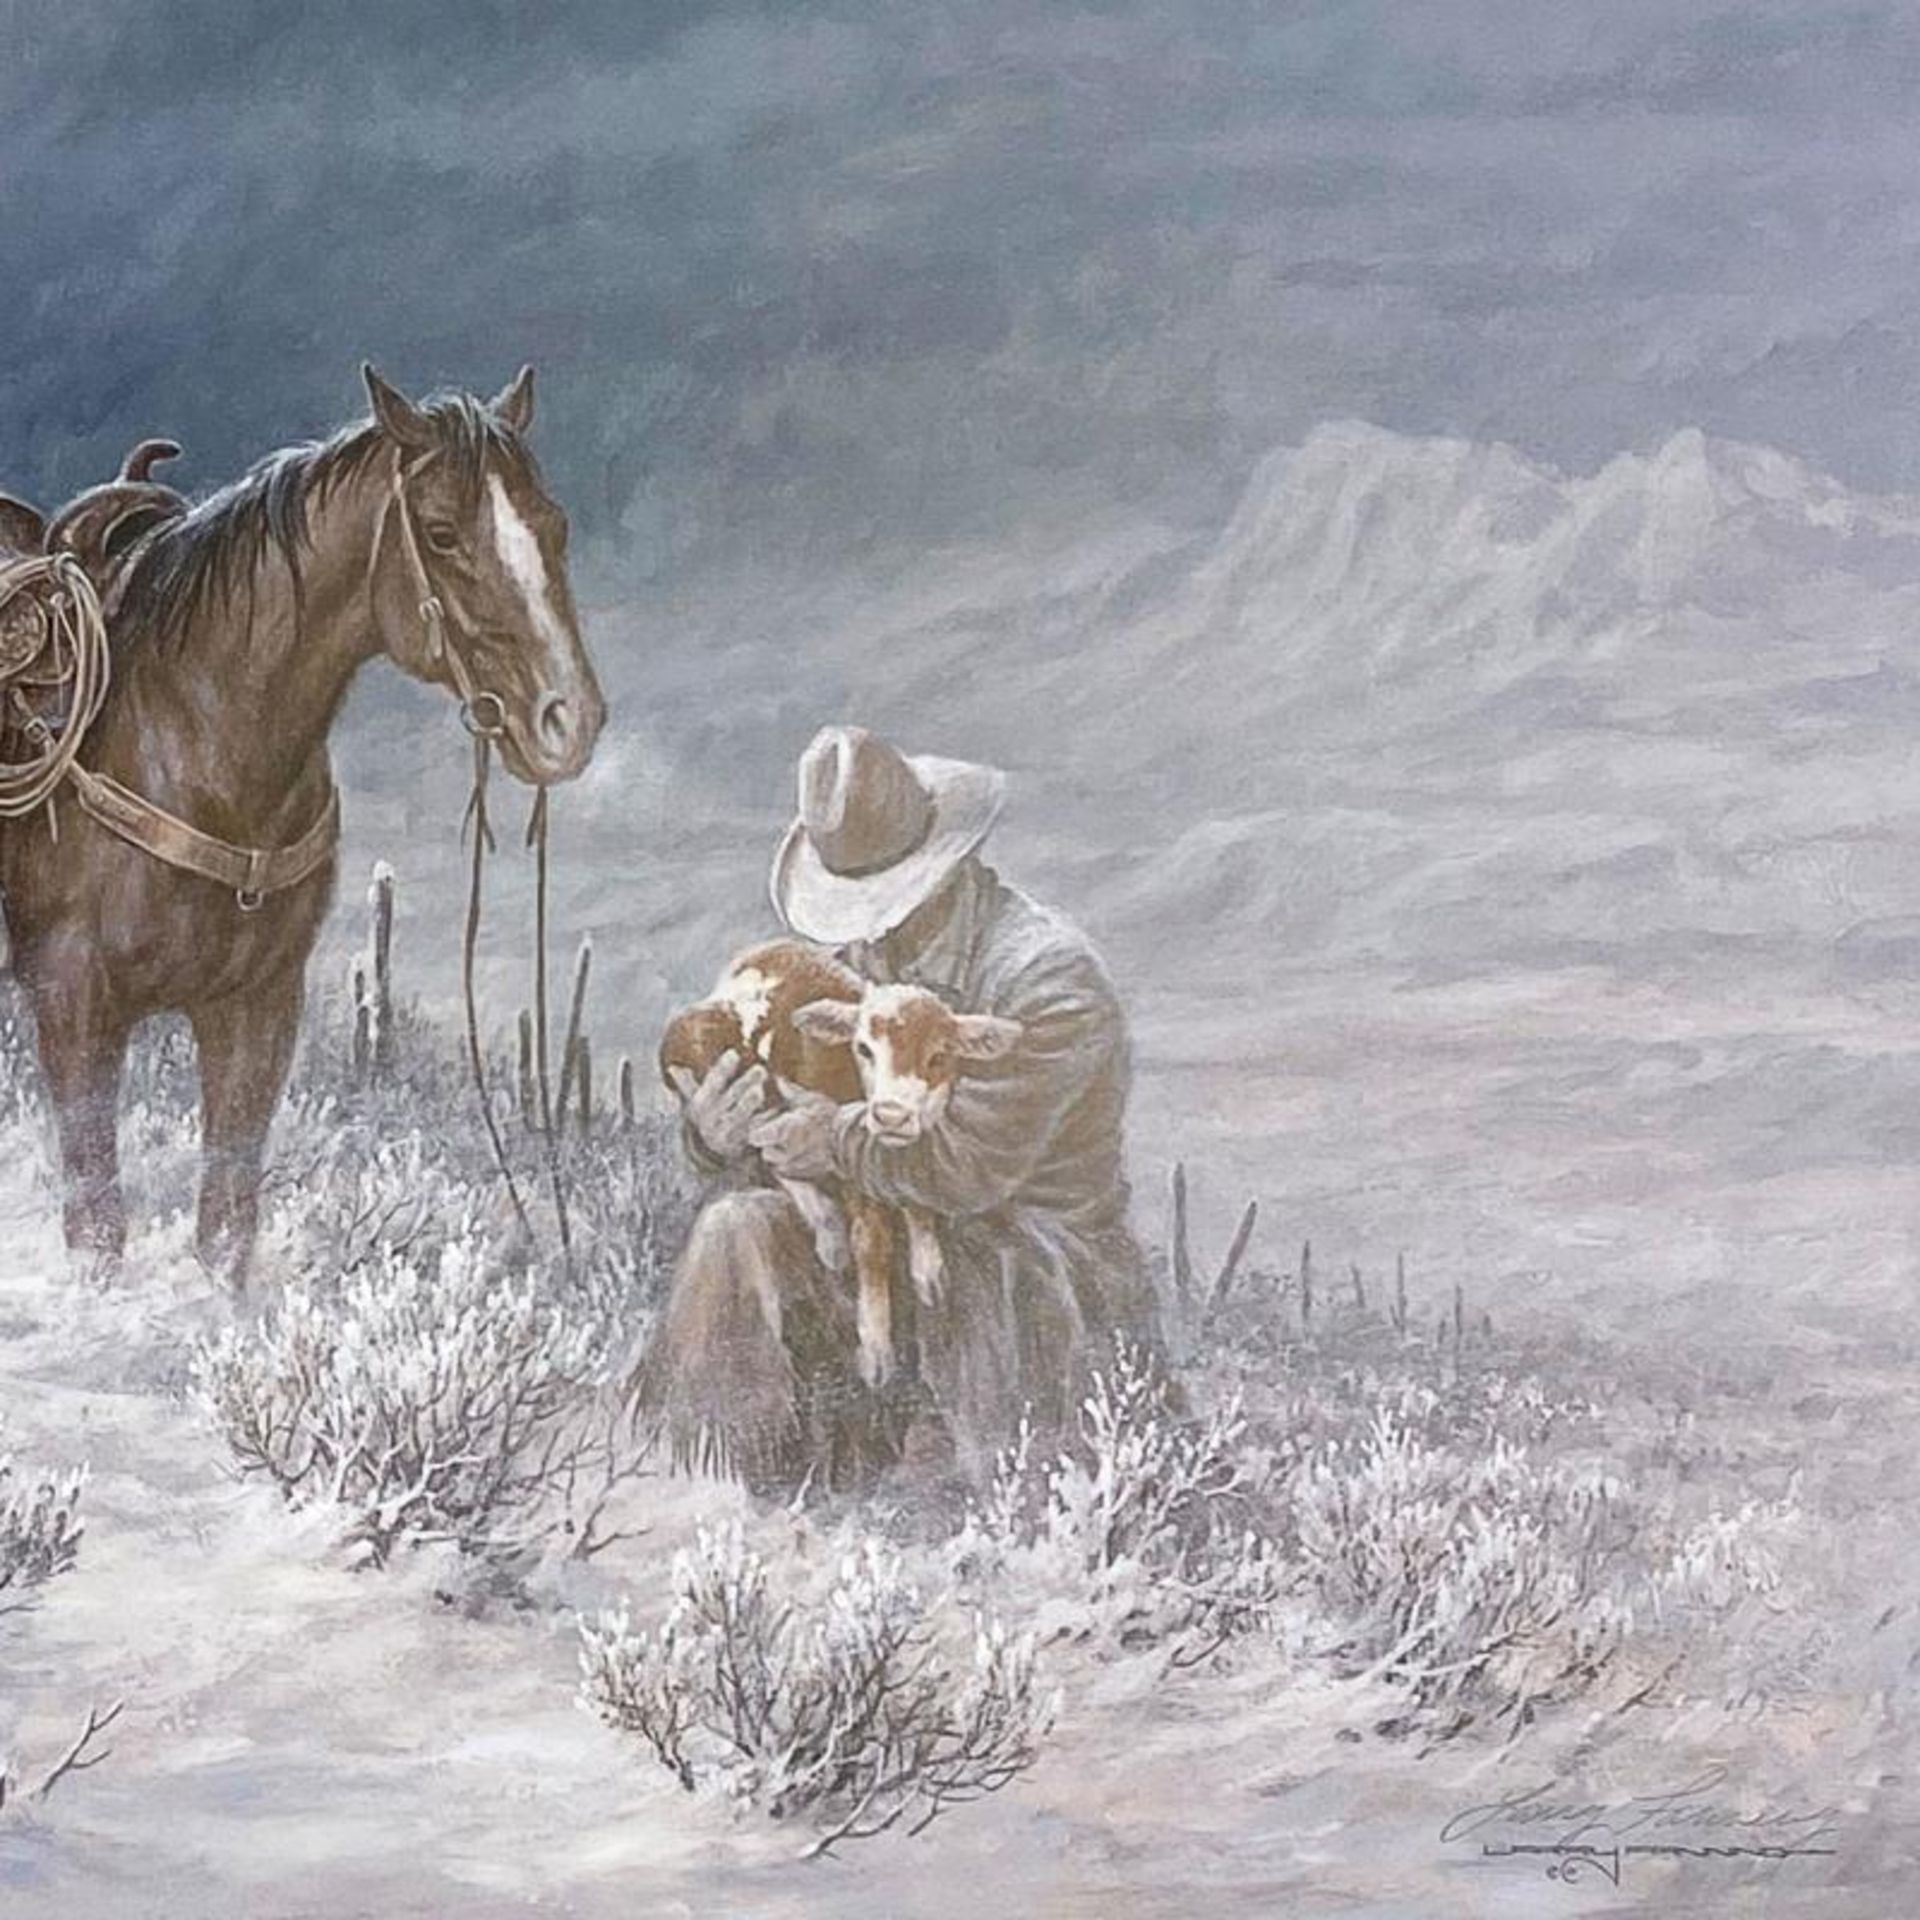 Larry Fanning (1938-2014), "High Range Early Arrival" Limited Edition Lithograph - Image 3 of 3